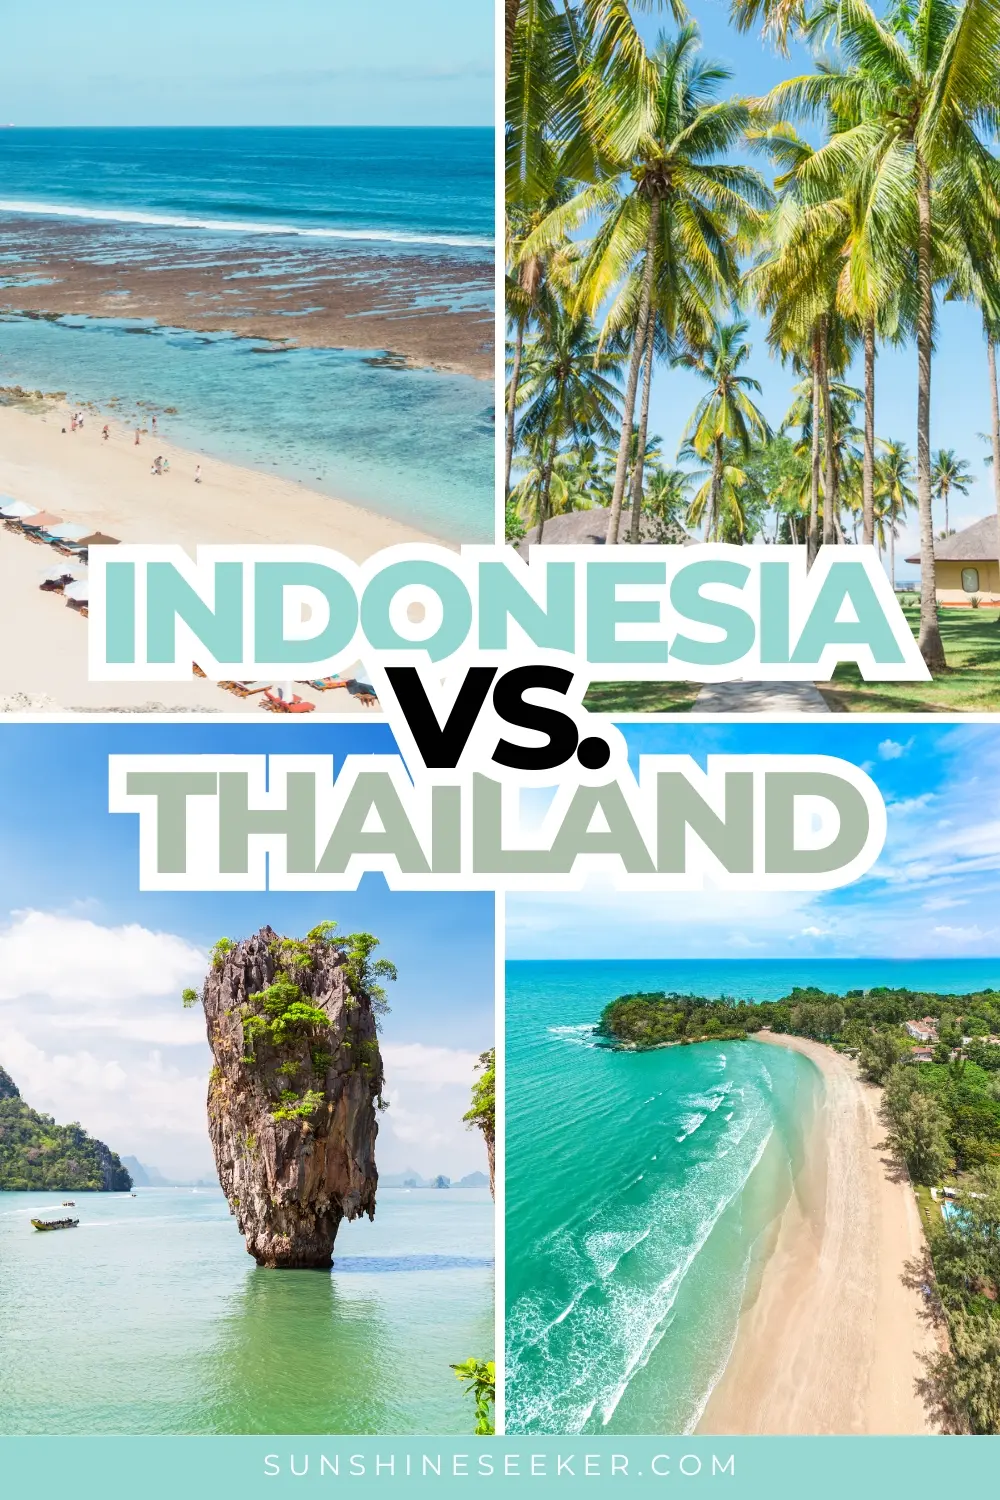 Indonesia vs. Thailand - Are you wondering which country would be the best country for your holiday? Click through for a complete comparison of the beaches, wildlife, temples and cost of travel in Indonesia vs. Thailand.